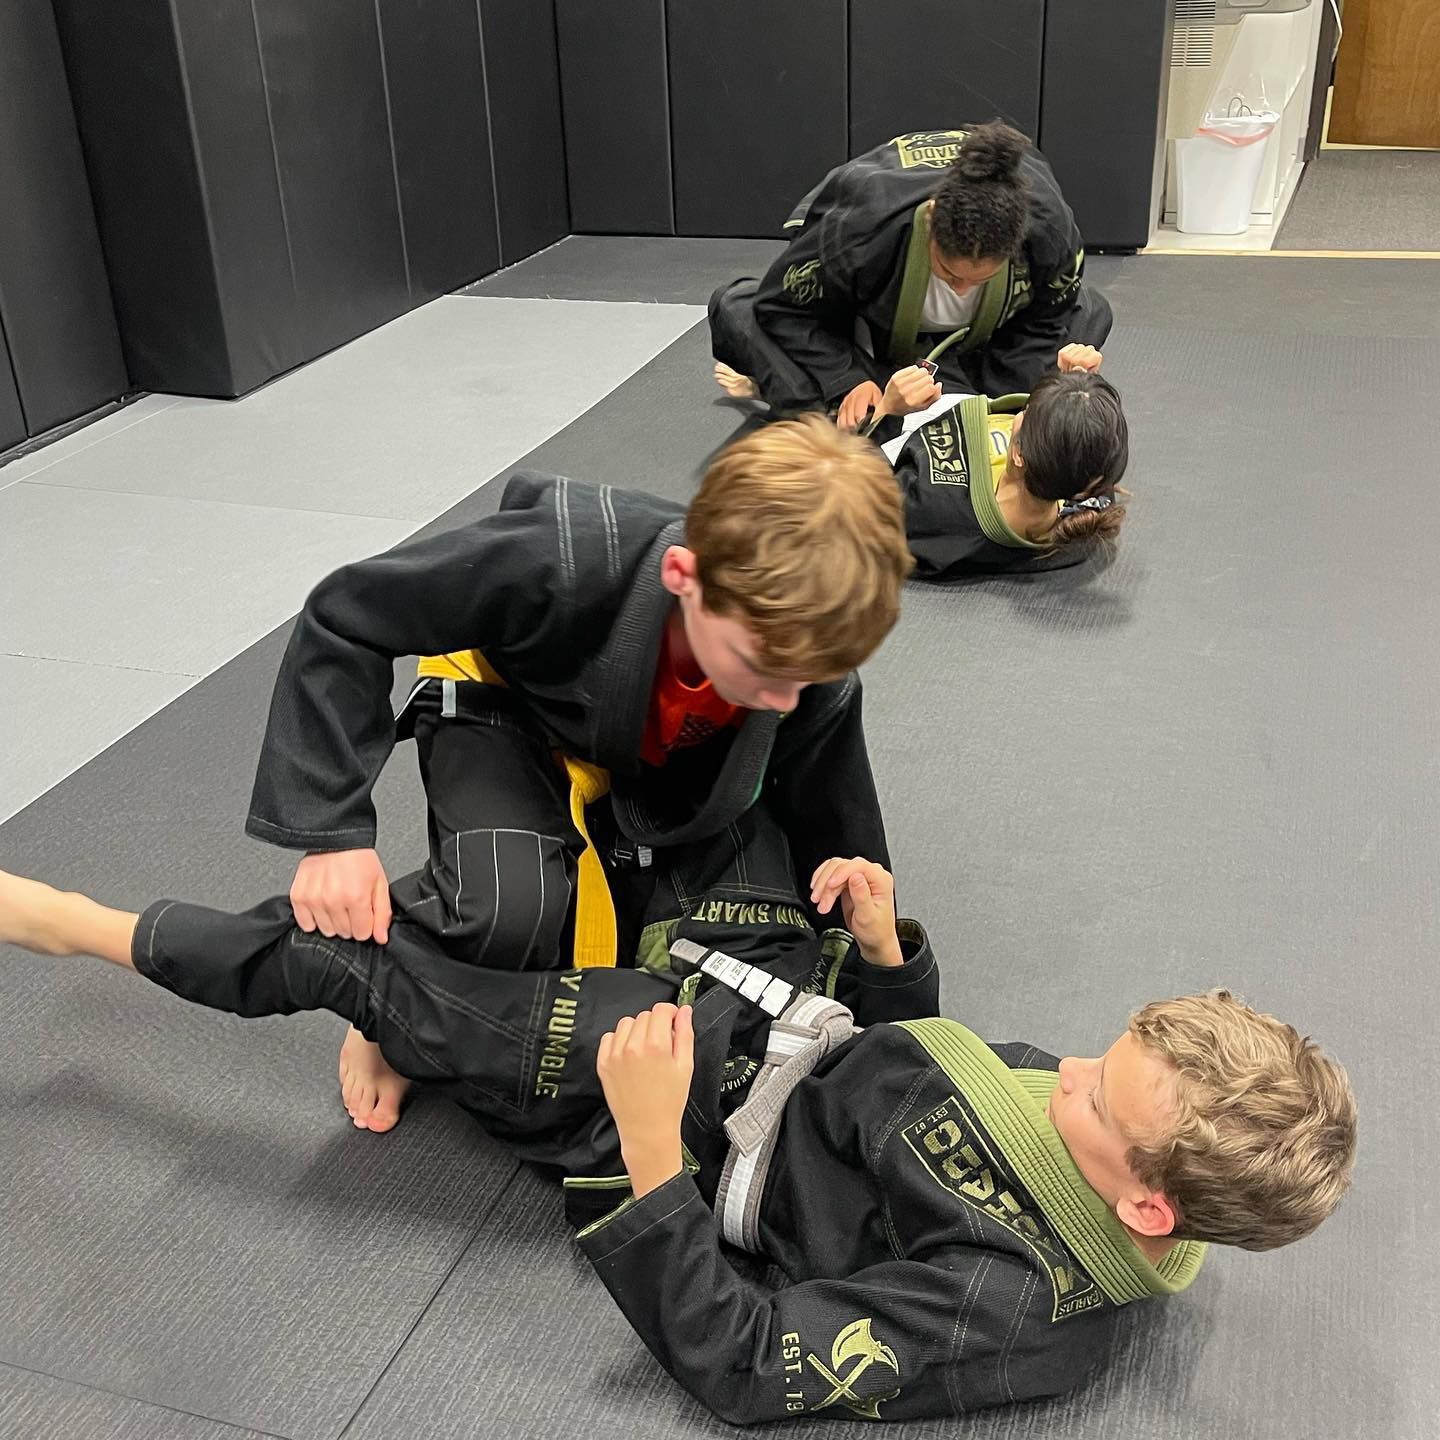 A group of young boys are practicing jiu jitsu on a mat.